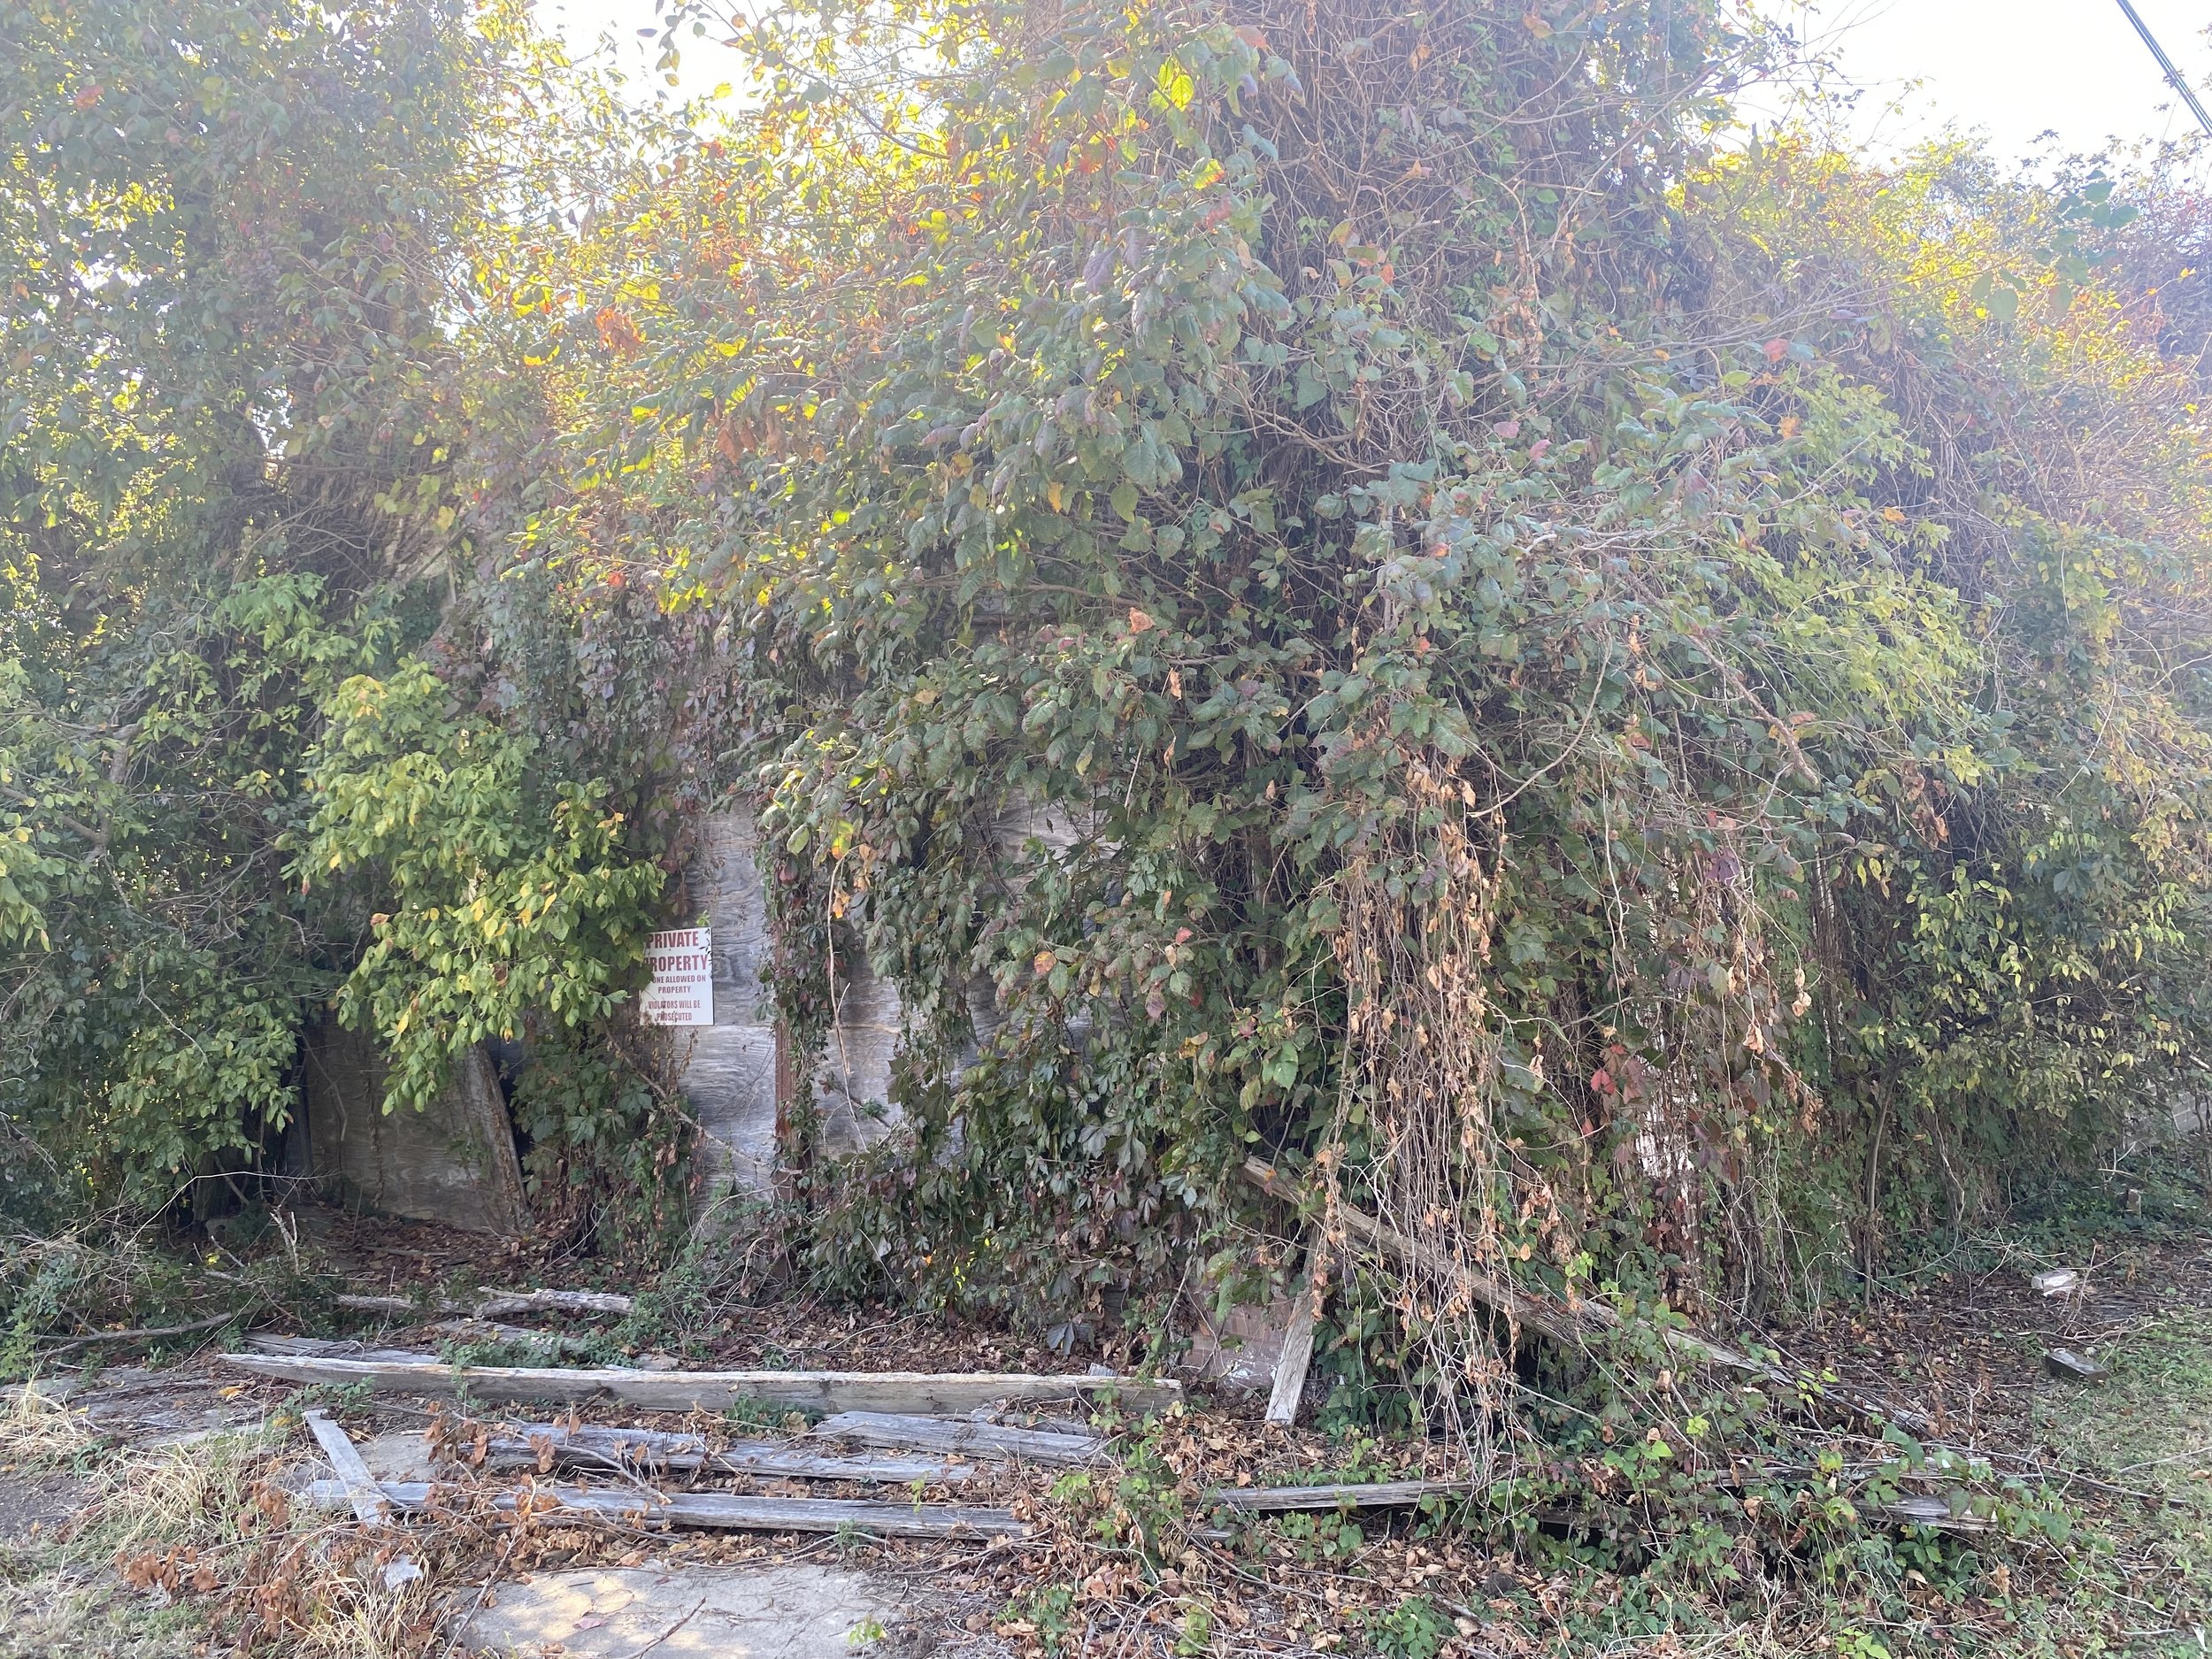  The remains of Bryant’s Grocery in Money, Mississippi, where Emmett Till’s nightmare began. 